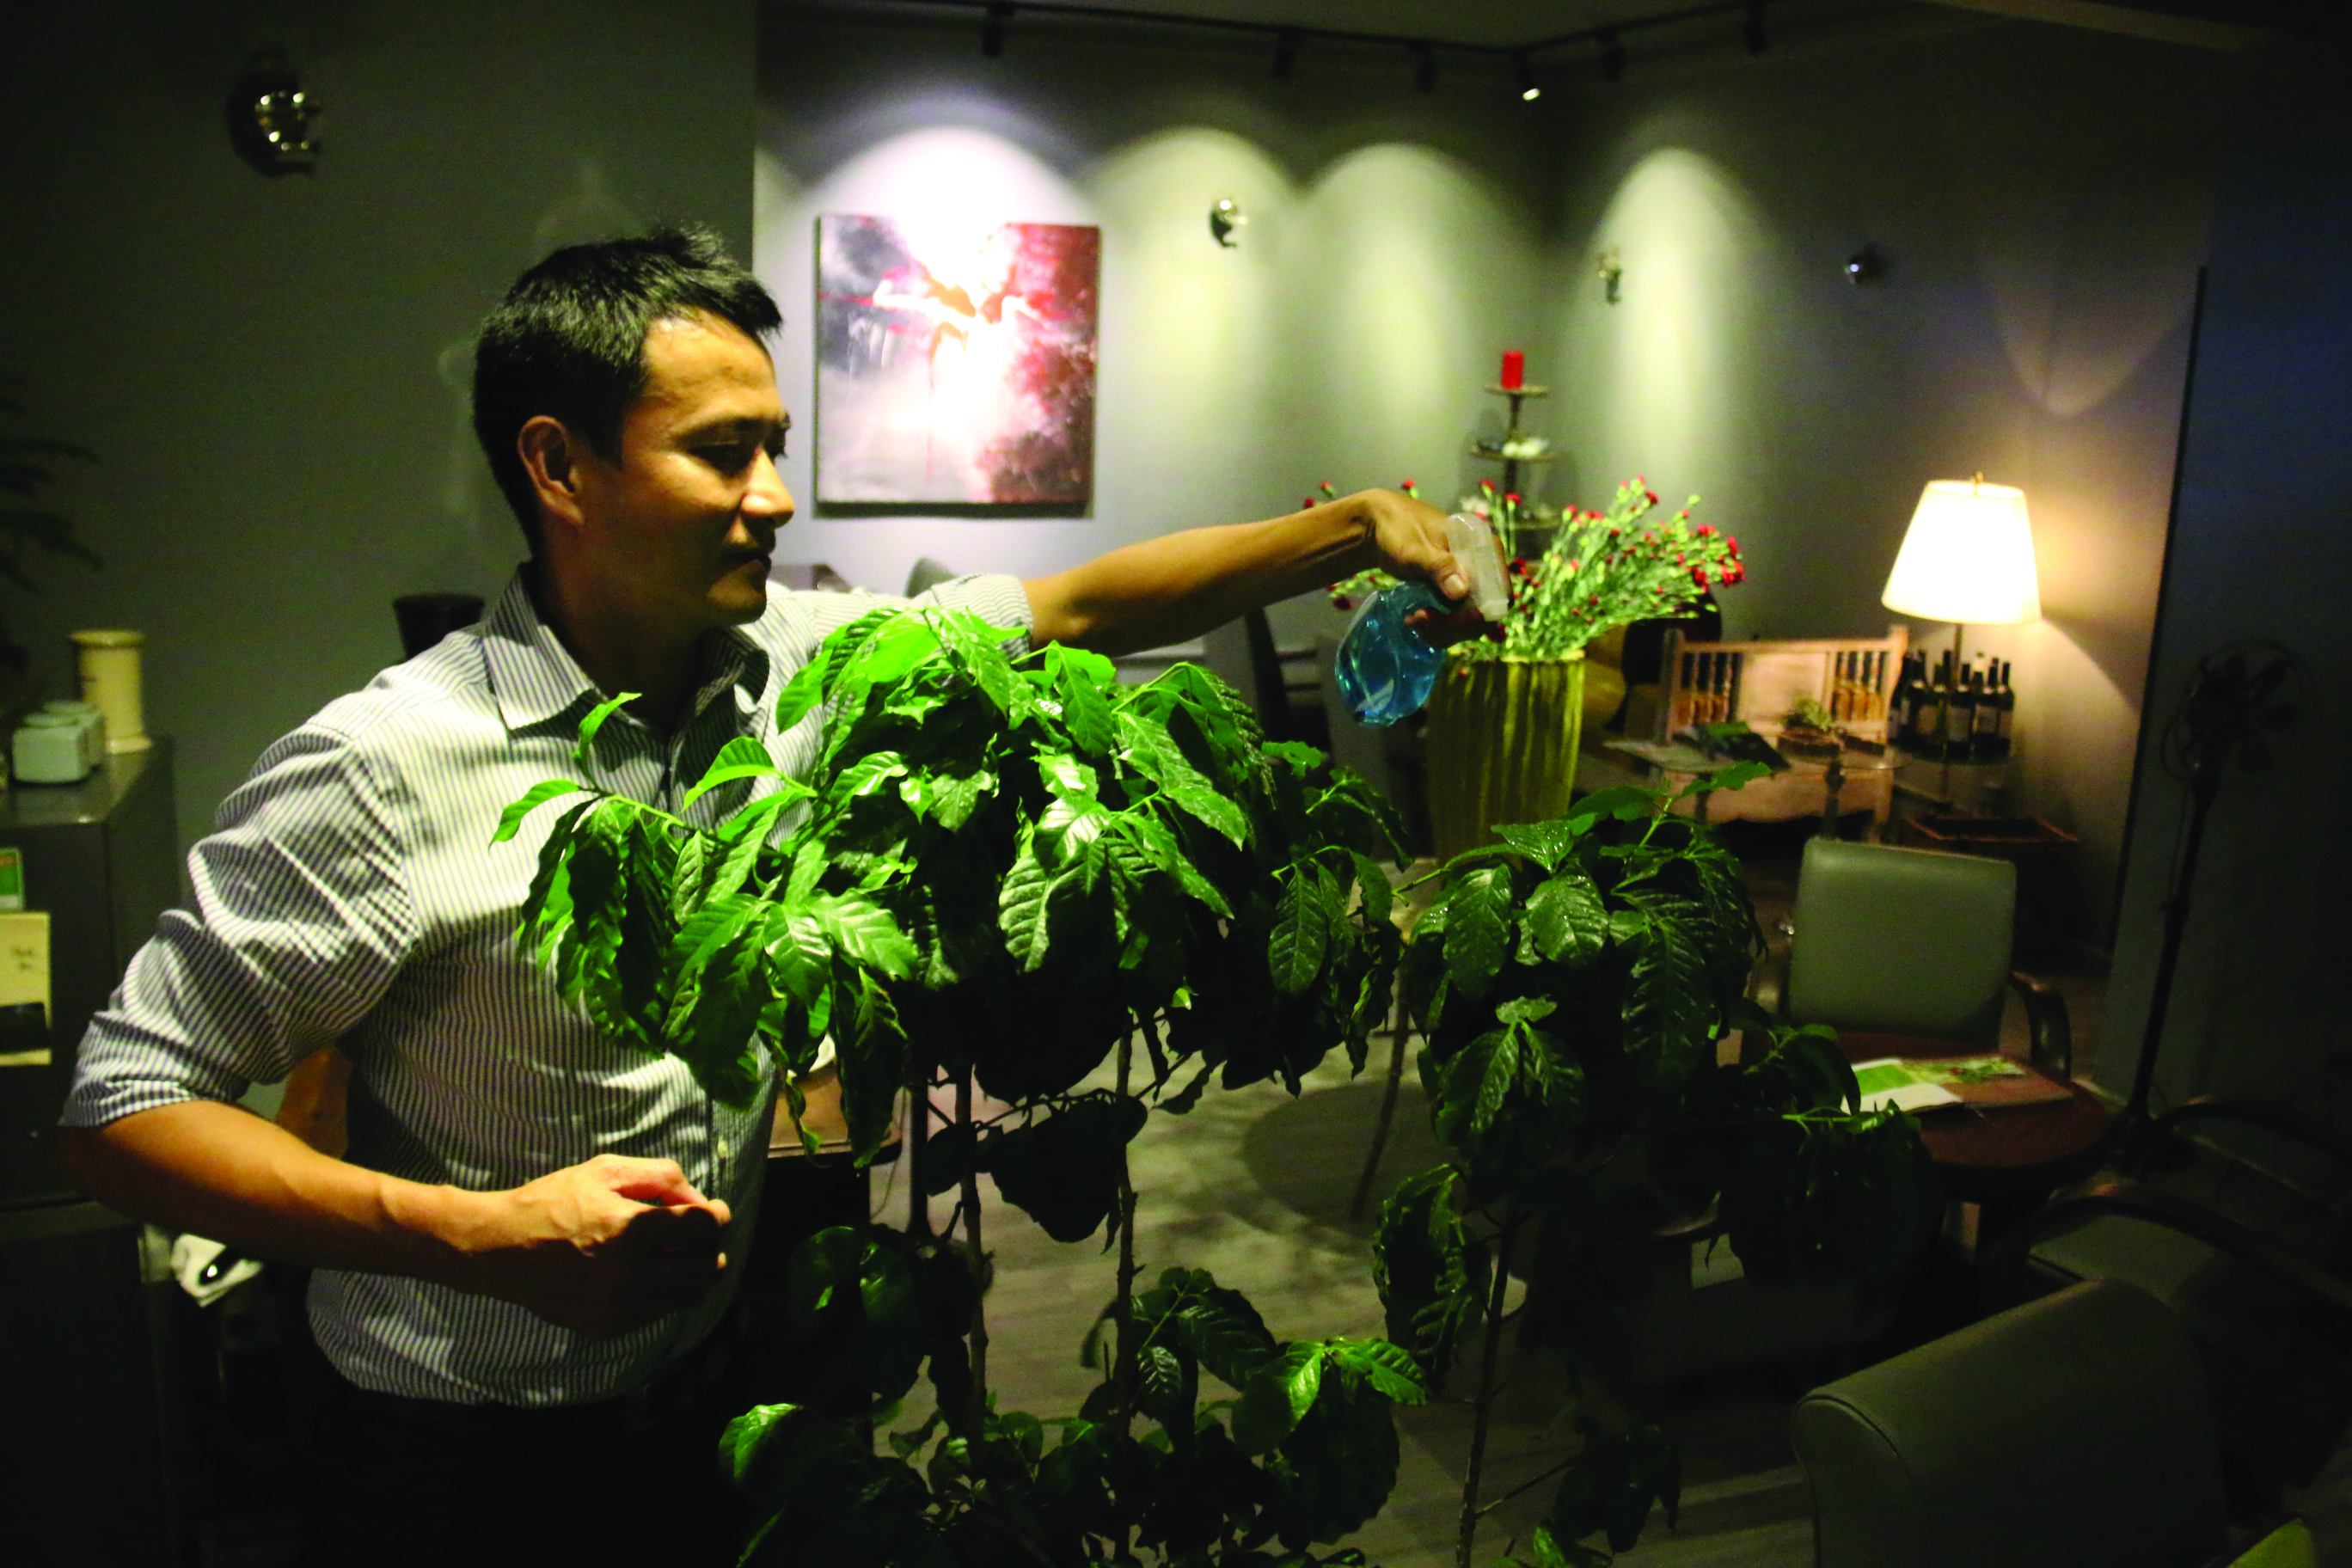 Quang Vinh takes care of the old Arabica coffee plant that he keeps in his coffee shop. Photo: Ngoc Hien / Tuoi Tre.